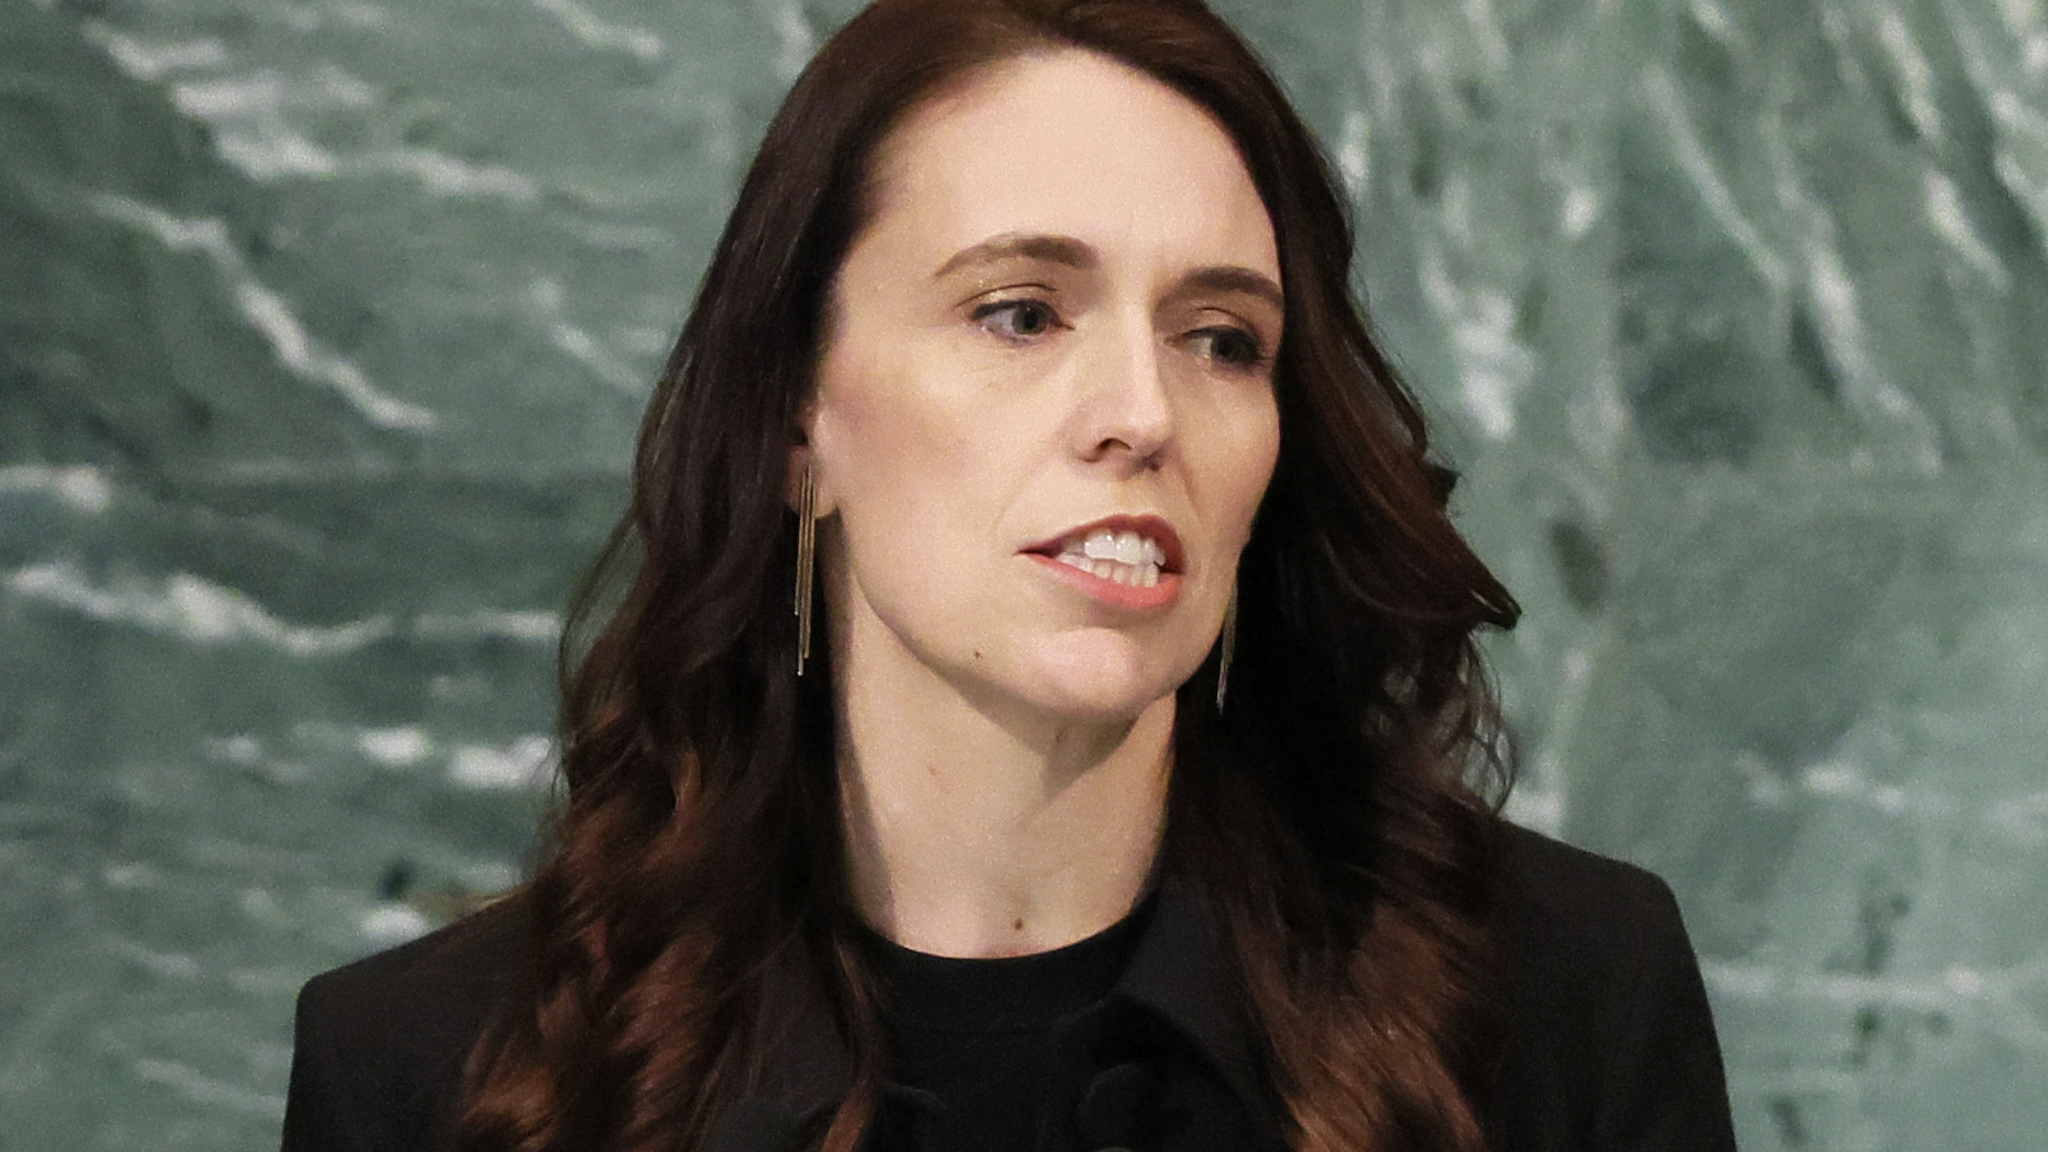 NEW YORK, NEW YORK - SEPTEMBER 23: Prime Minister of New Zealand Jacinda Ardern speaks at the 77th session of the United Nations General Assembly (UNGA) at U.N. headquarters on September 23, 2022 in New York City. After two years of holding the session virtually or in a hybrid format, 157 heads of state and representatives of government are expected to attend the General Assembly in person.